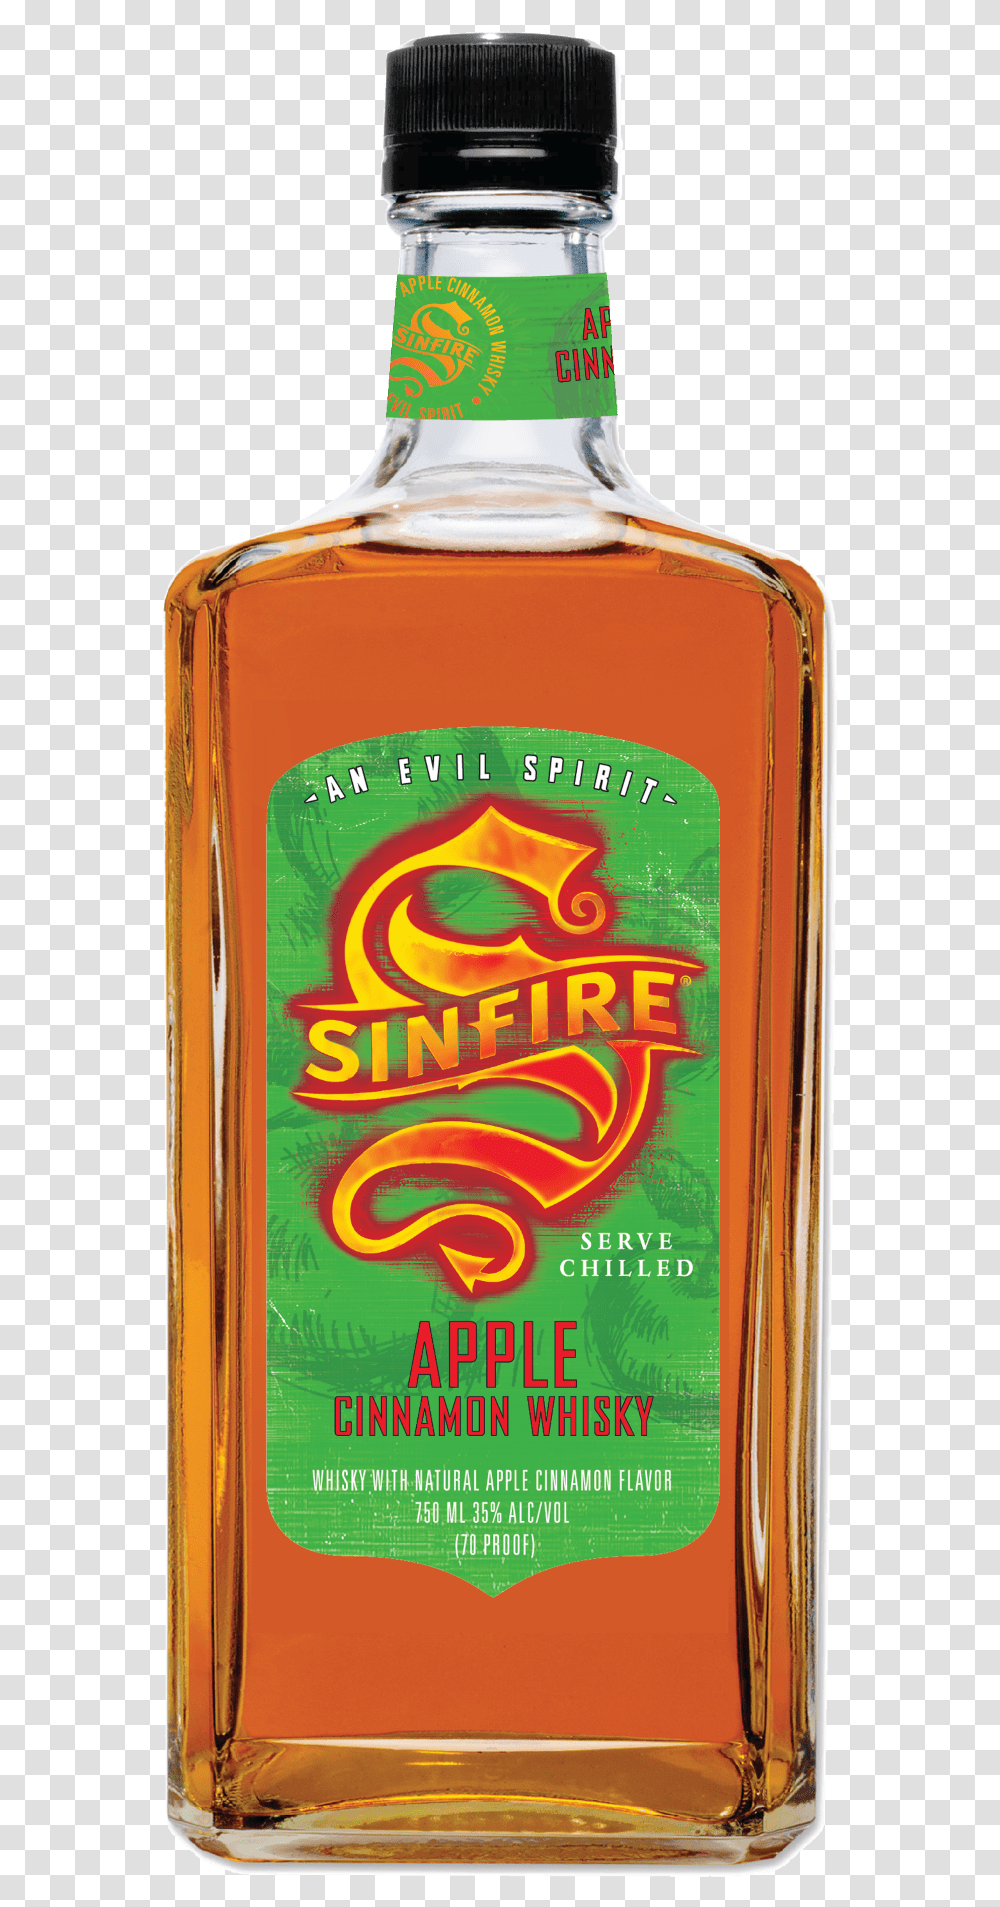 Can You Out Fireball Fireball By Adding Apples To The Sinfire Apple Cinnamon Whiskey, Absinthe, Liquor, Alcohol, Beverage Transparent Png